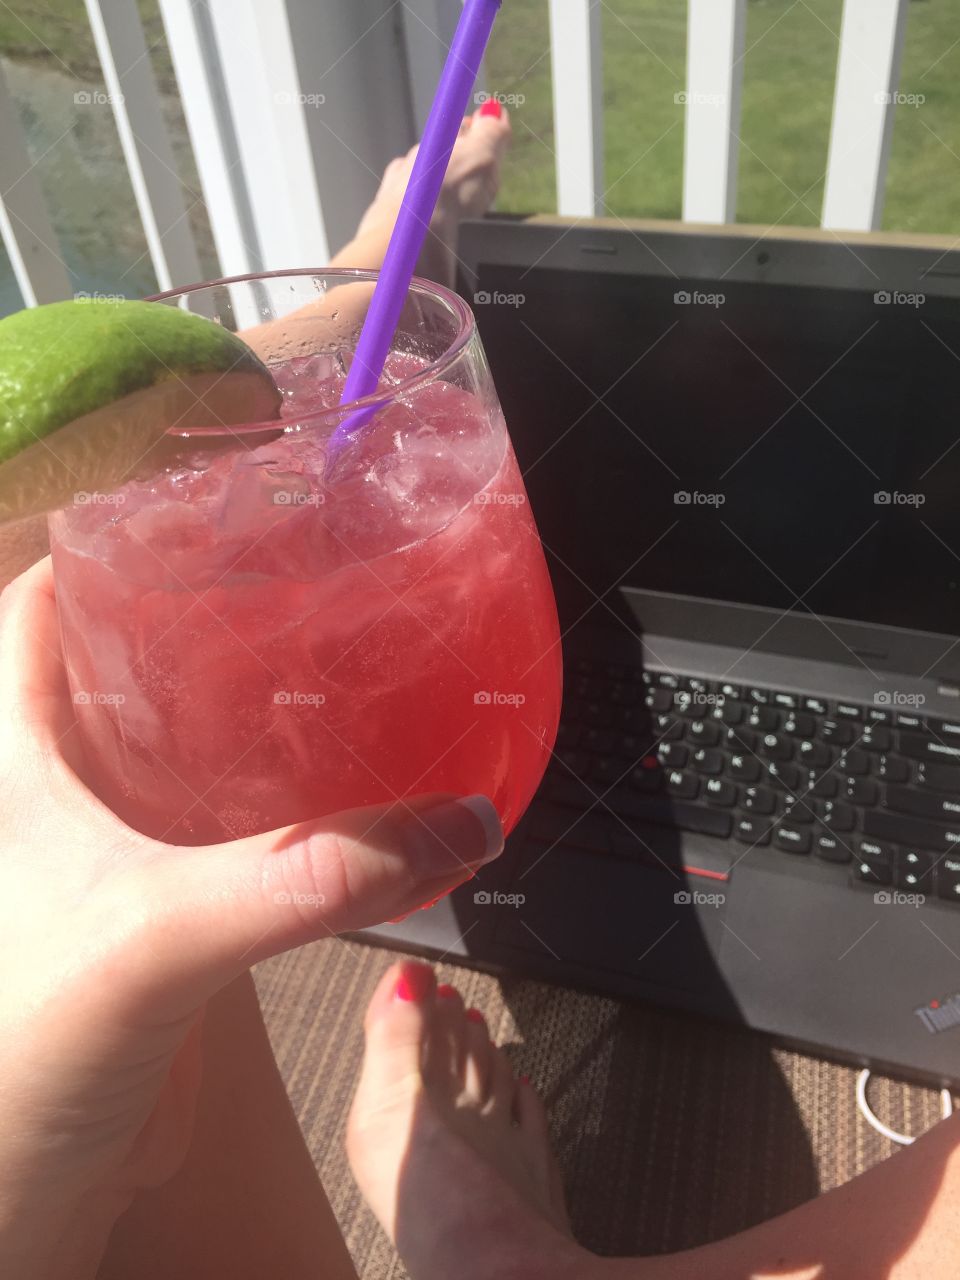 Summer means pretty drinks